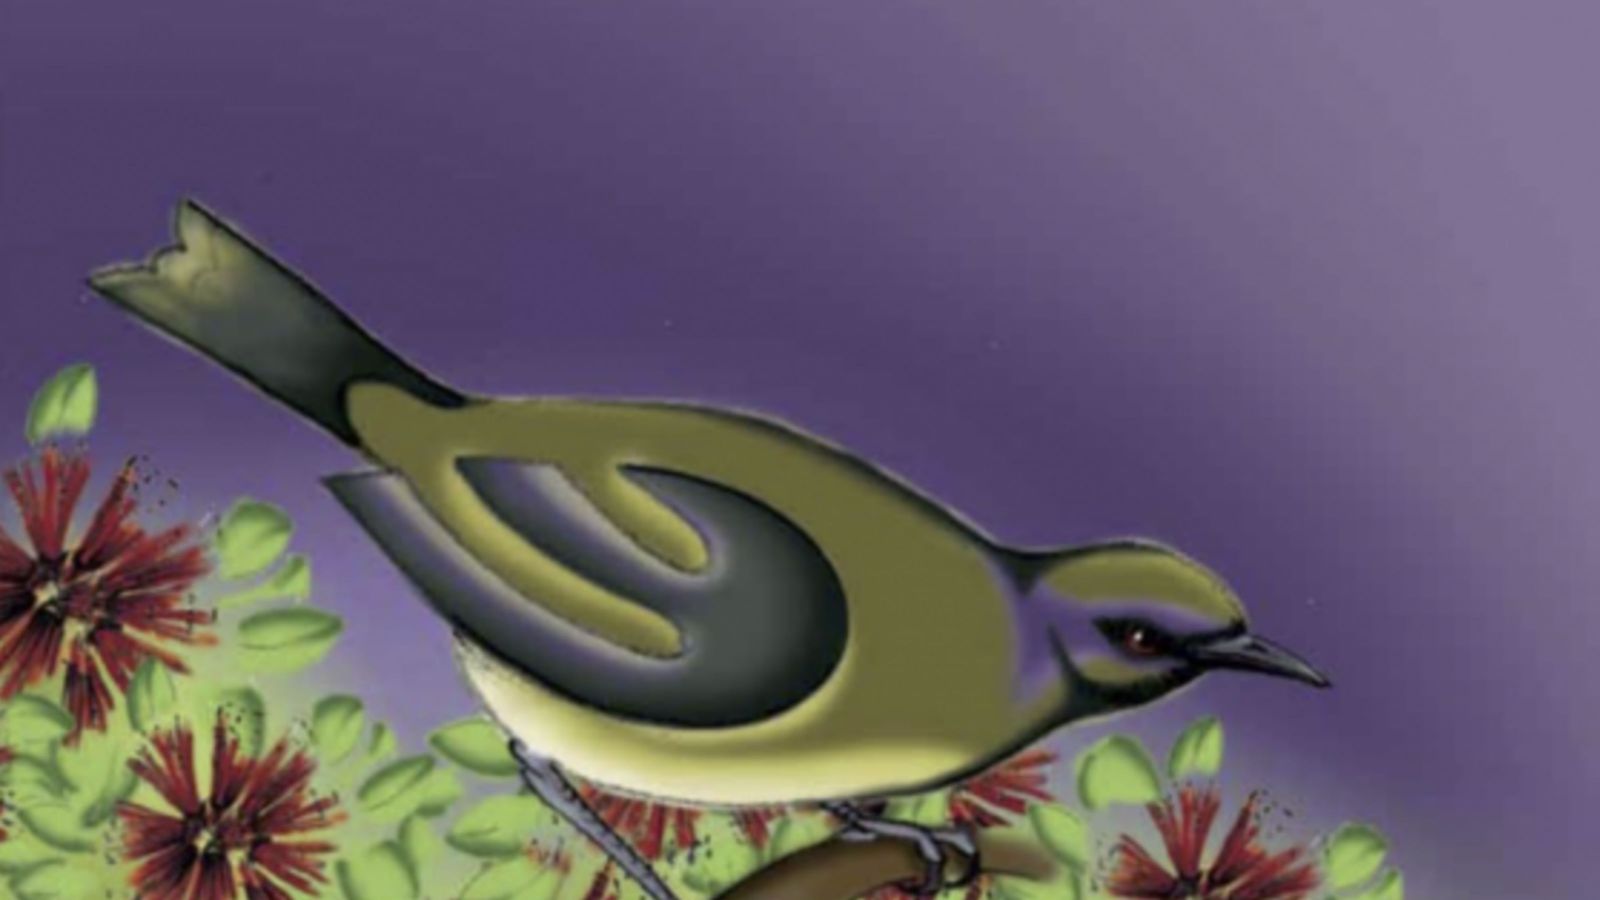 A bird perched on a branch in front of a dark purple background.